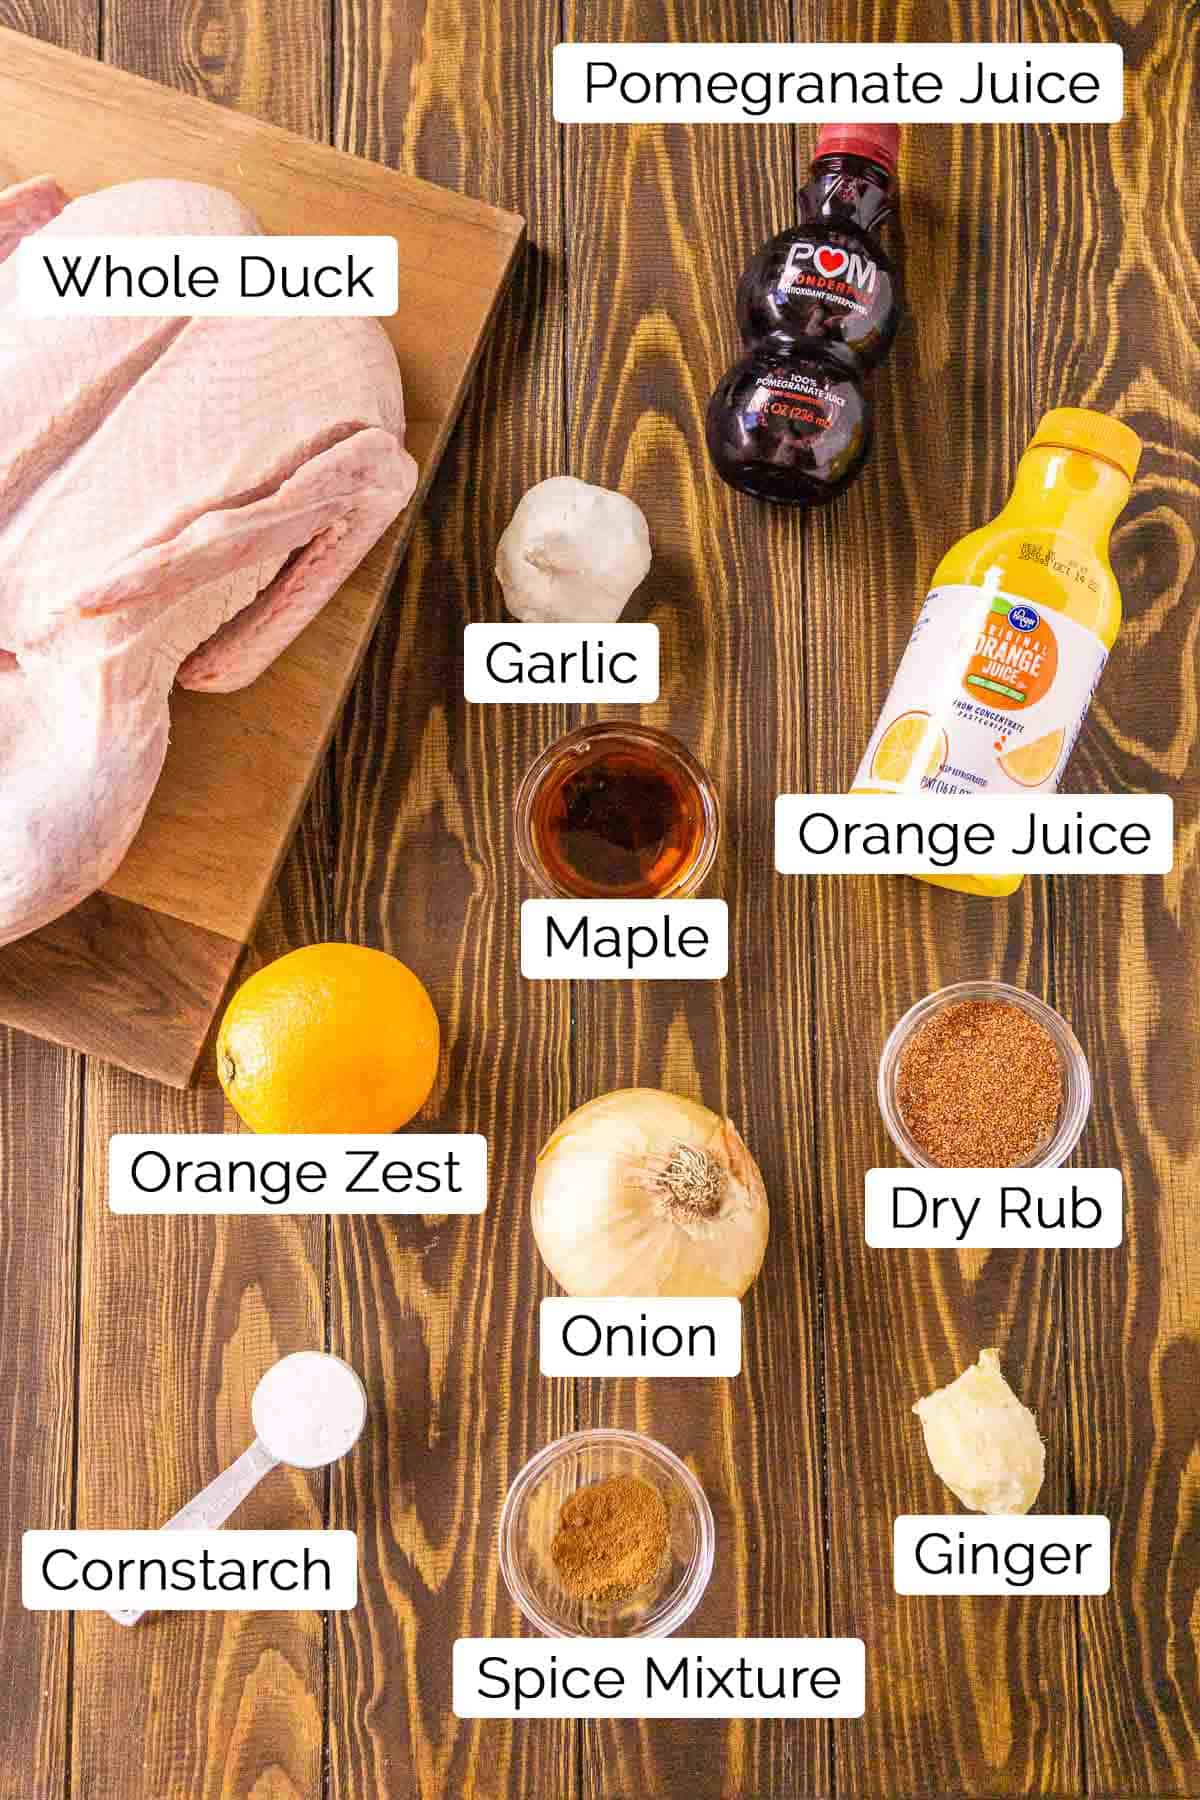 The ingredients on a wooden surface with black and white labels by each item.